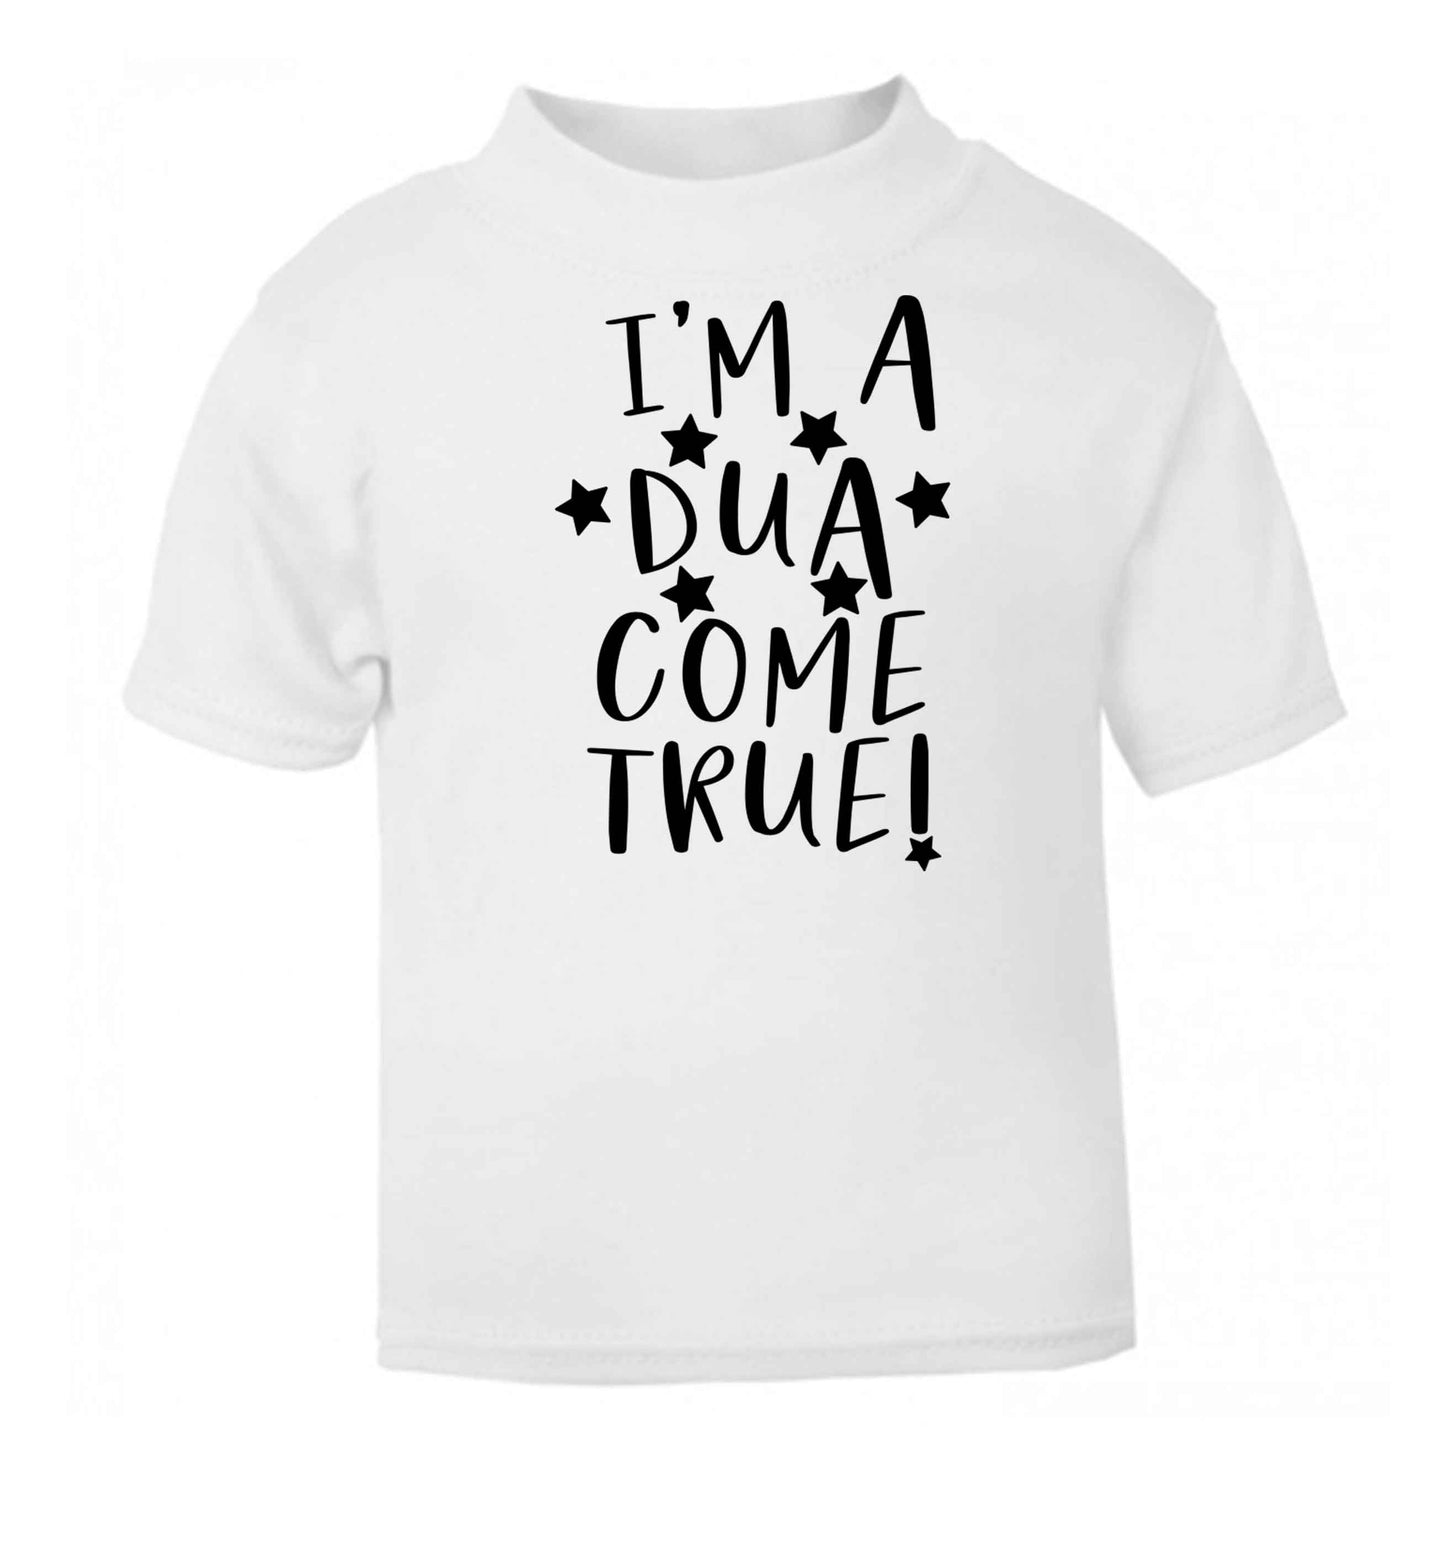 I'm a dua come true white baby toddler Tshirt 2 Years